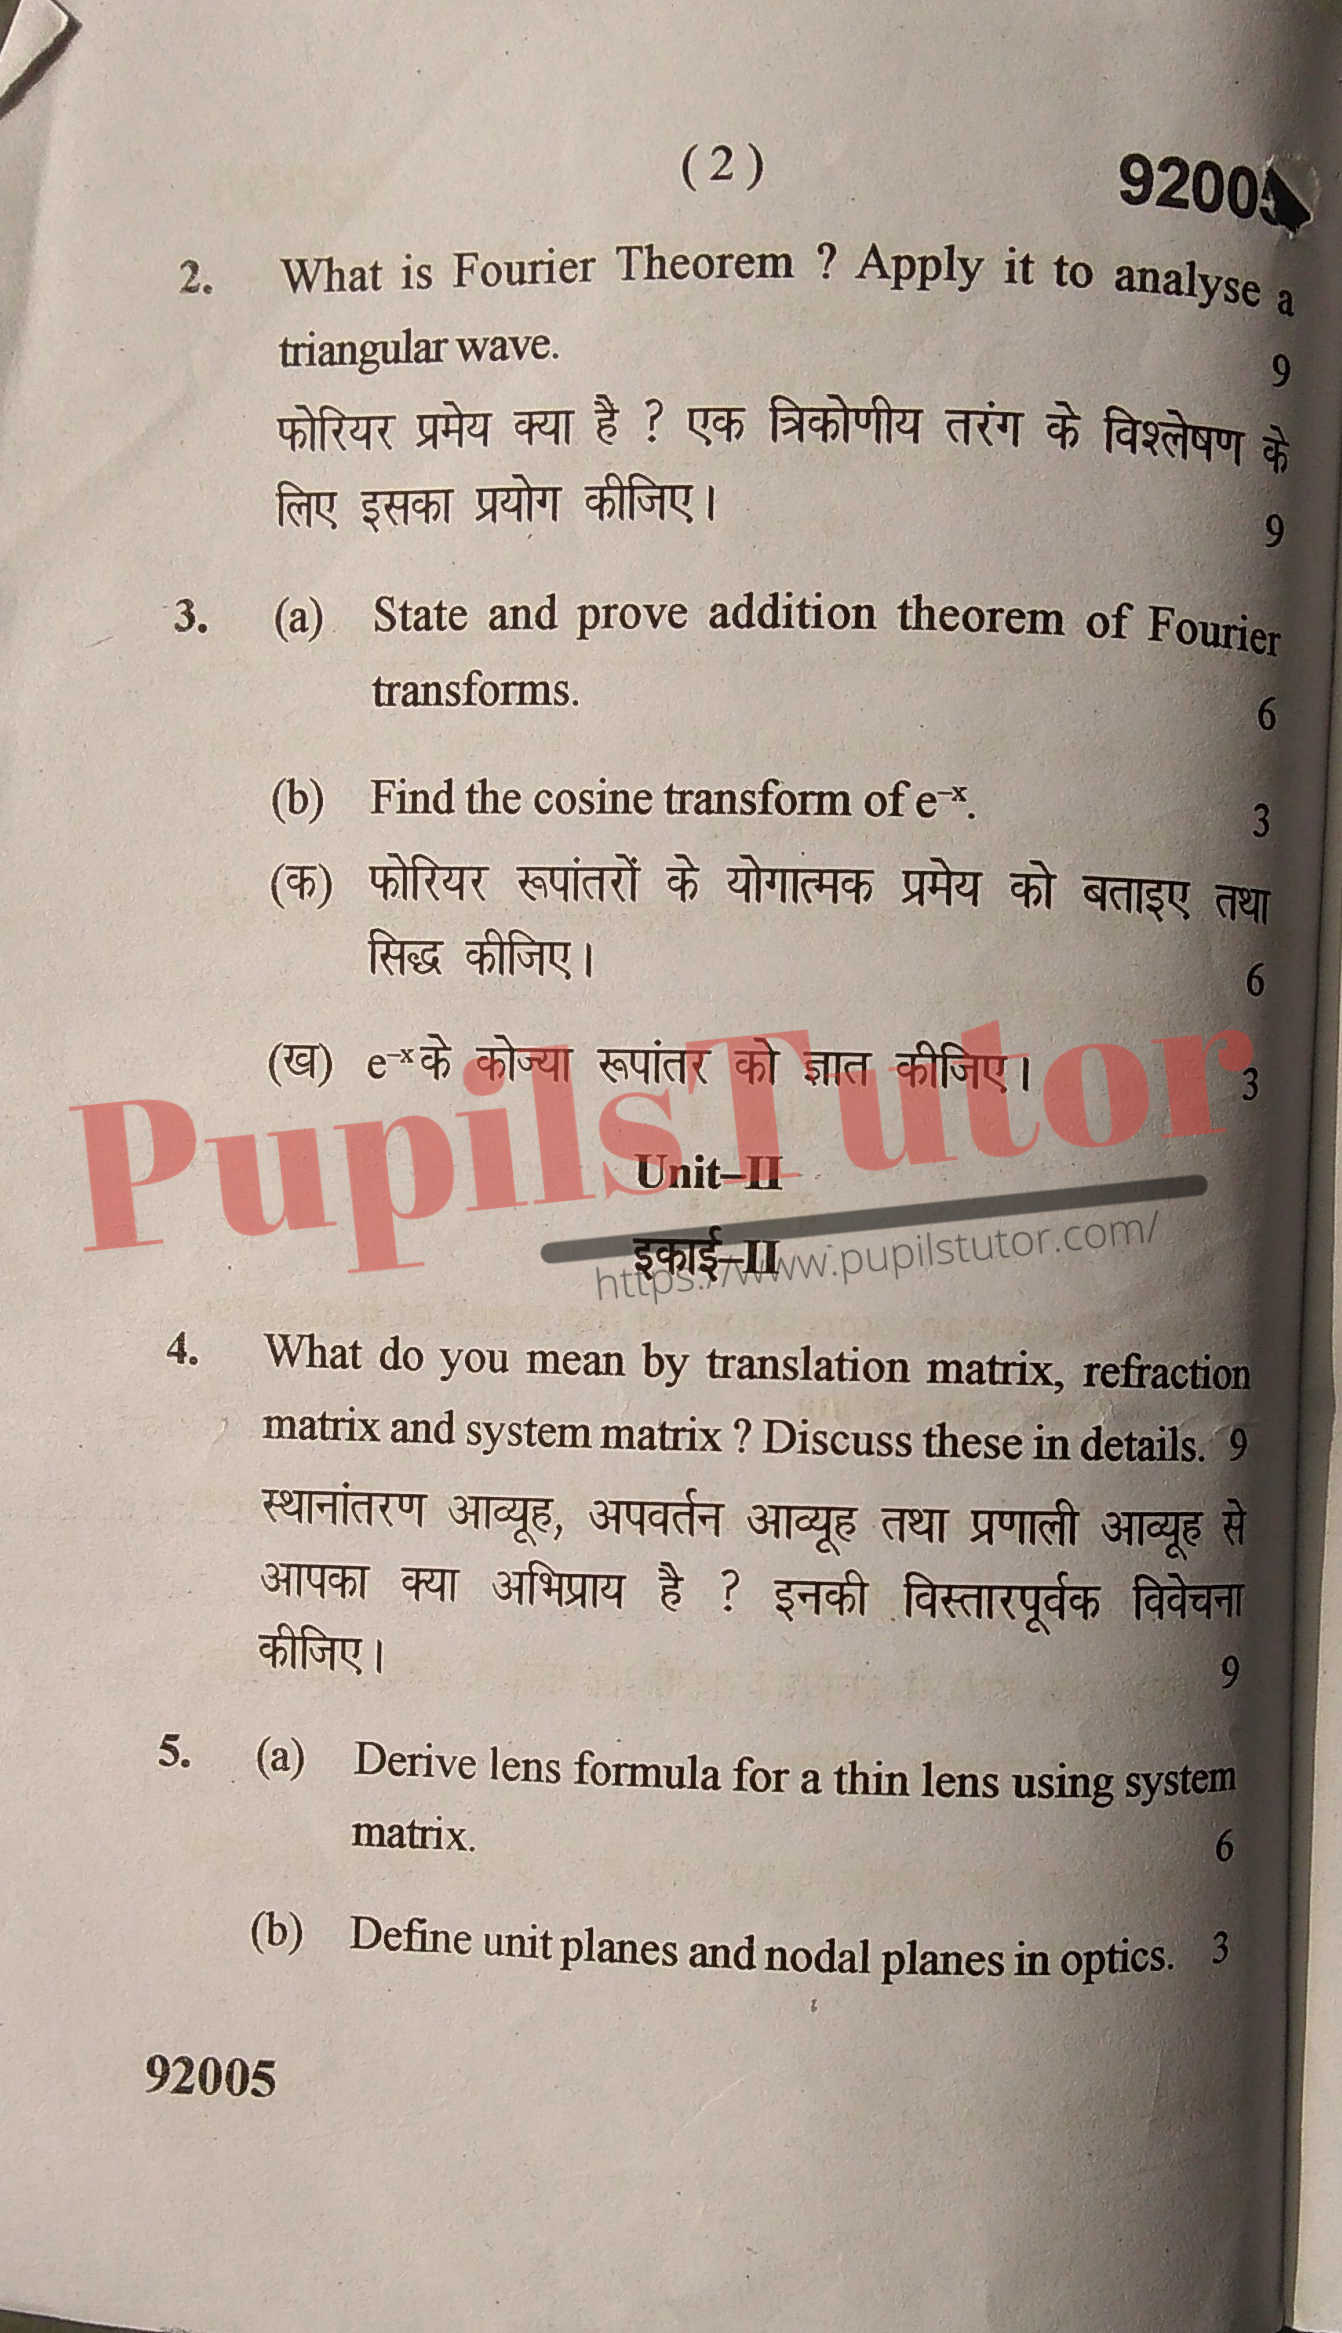 M.D. University B.Sc. [Physics] Optics - I Third Semester Important Question Answer And Solution - www.pupilstutor.com (Paper Page Number 2)